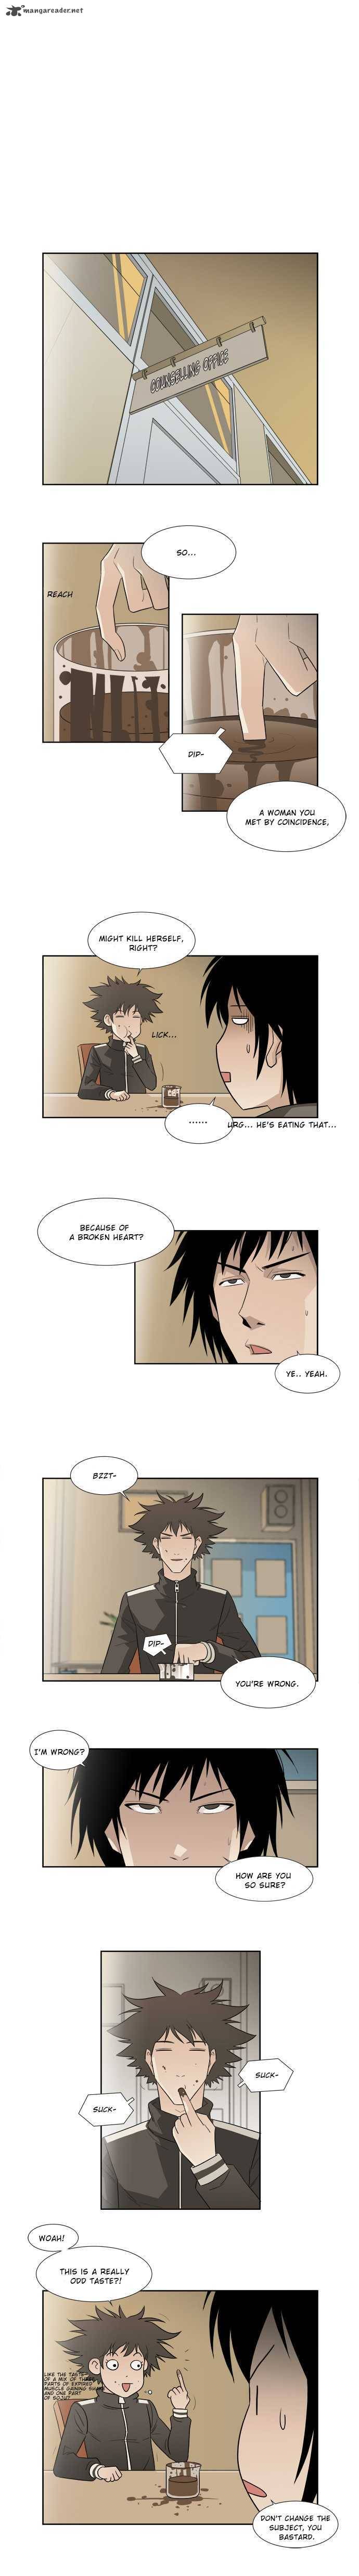 Melo Holic Chapter 3 Page 3